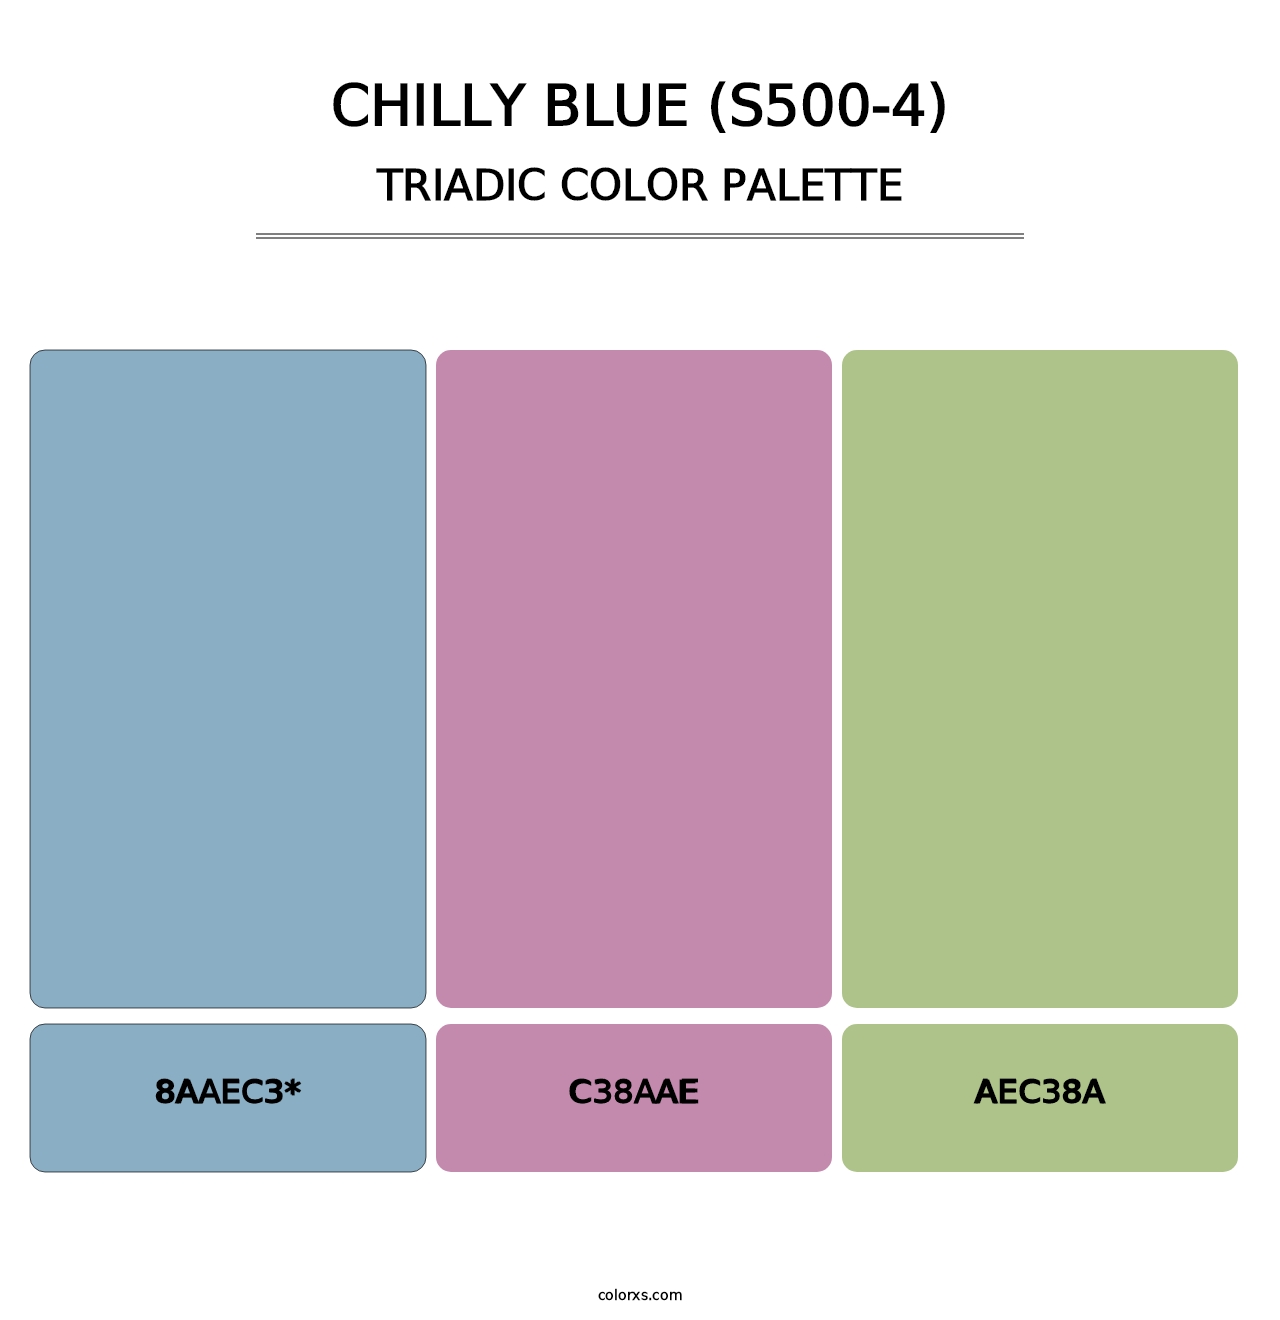 Chilly Blue (S500-4) - Triadic Color Palette